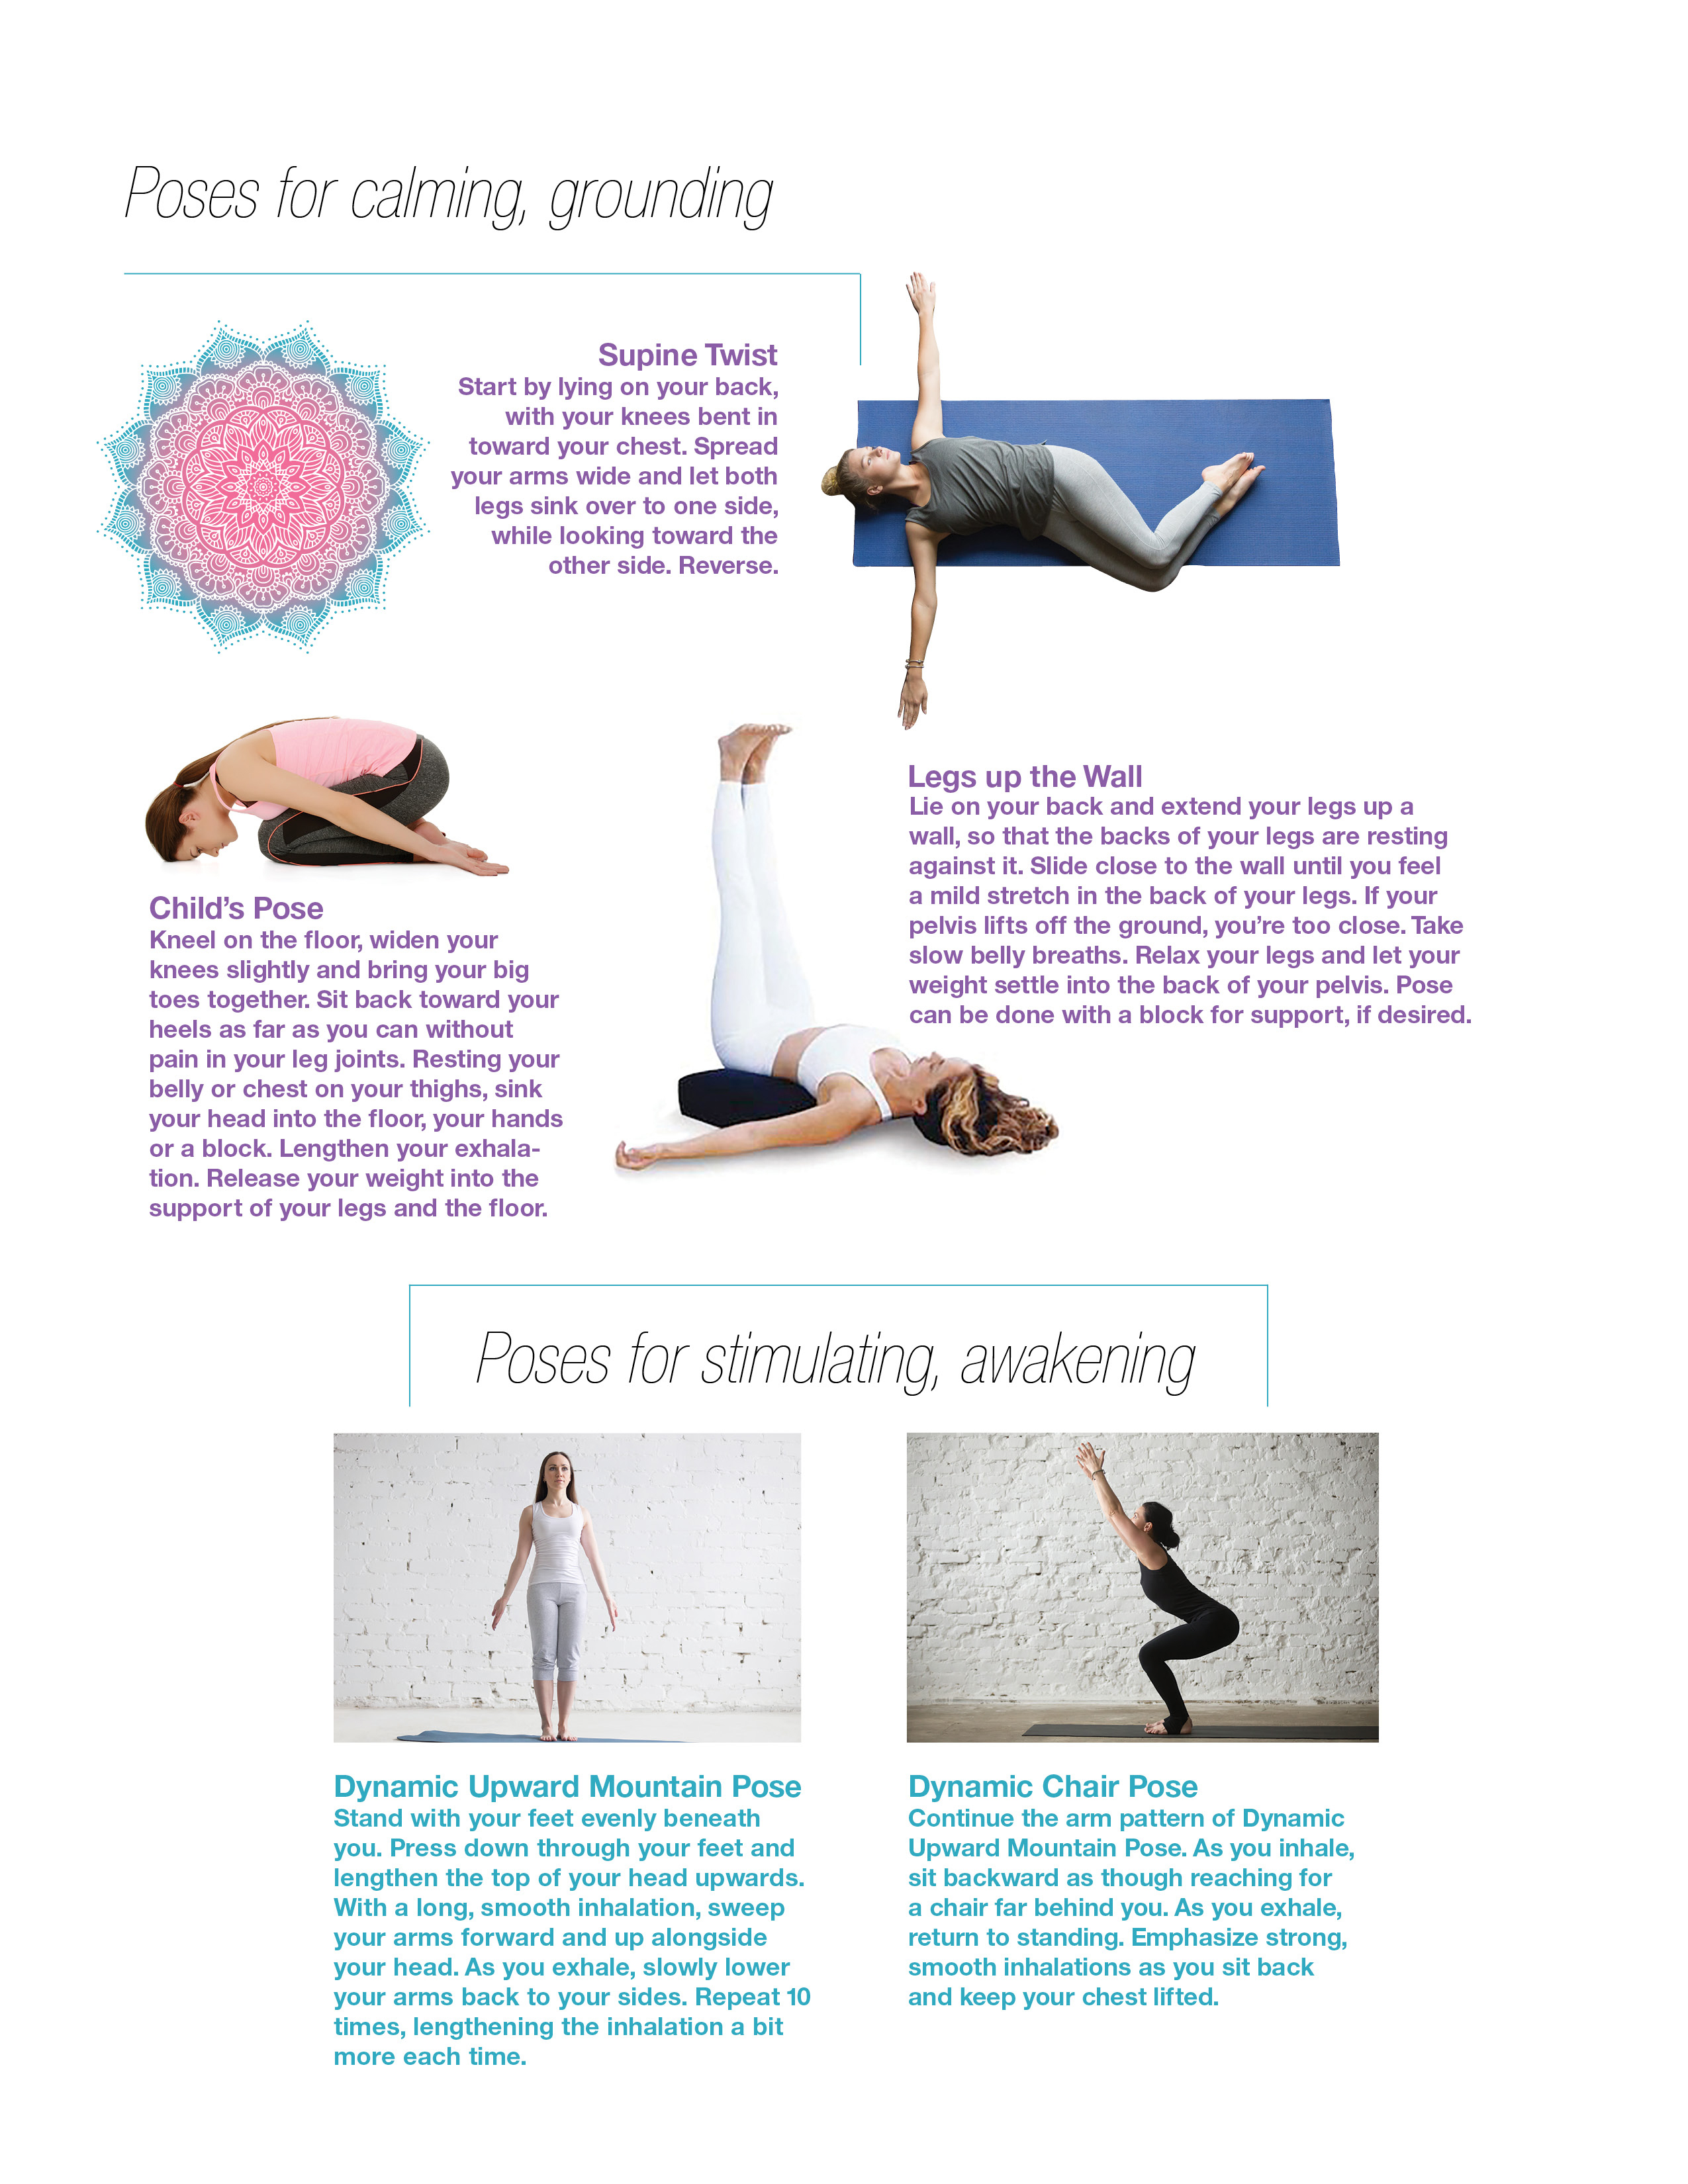 Theraputic yoga poses with descriptions